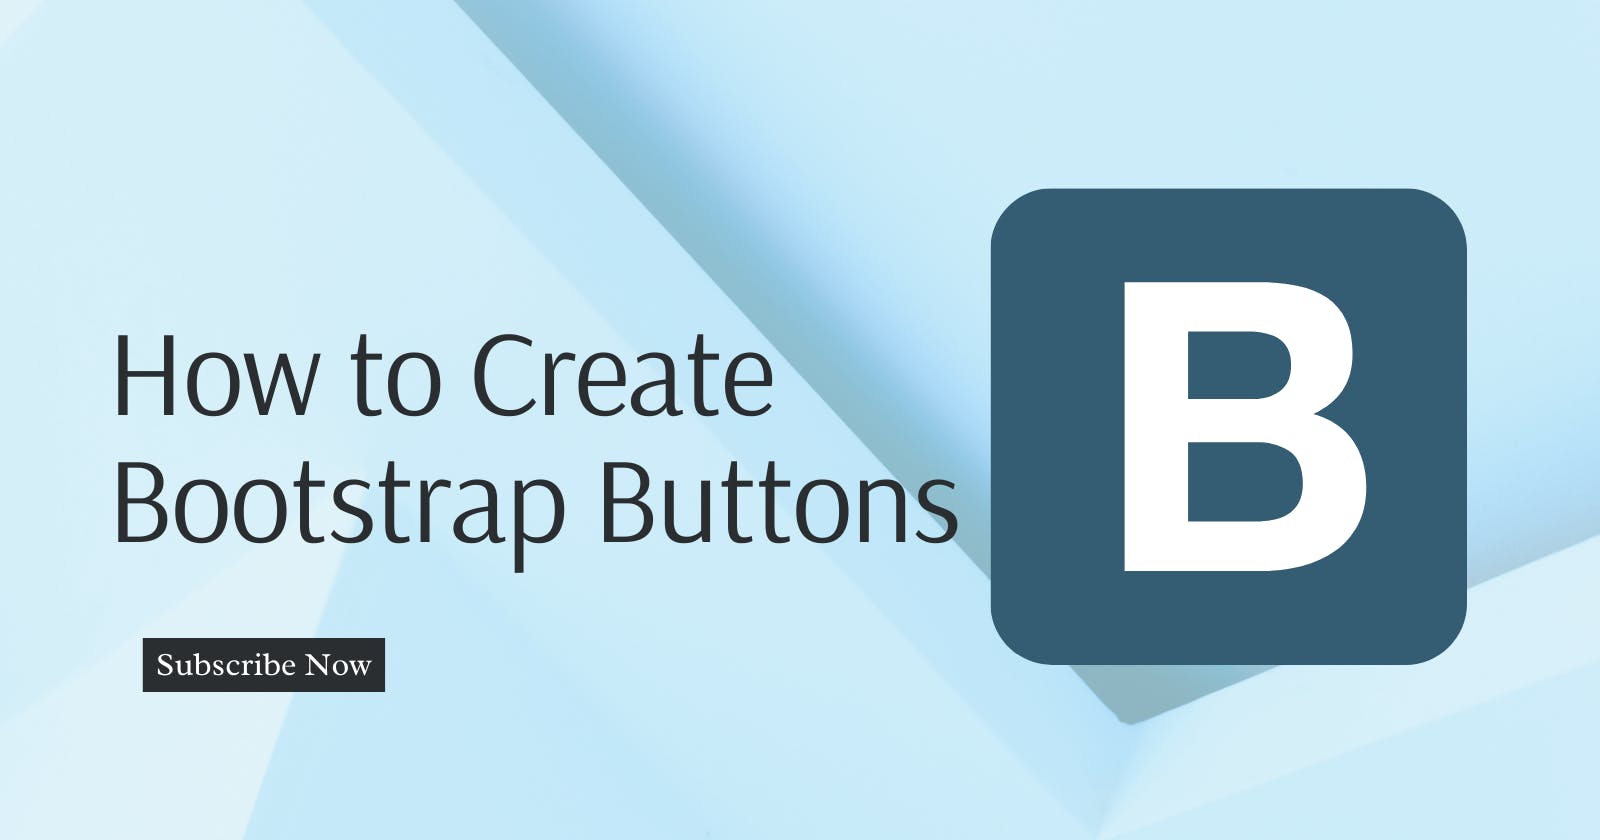 How to Create Bootstrap Buttons: A Comprehensive Guide